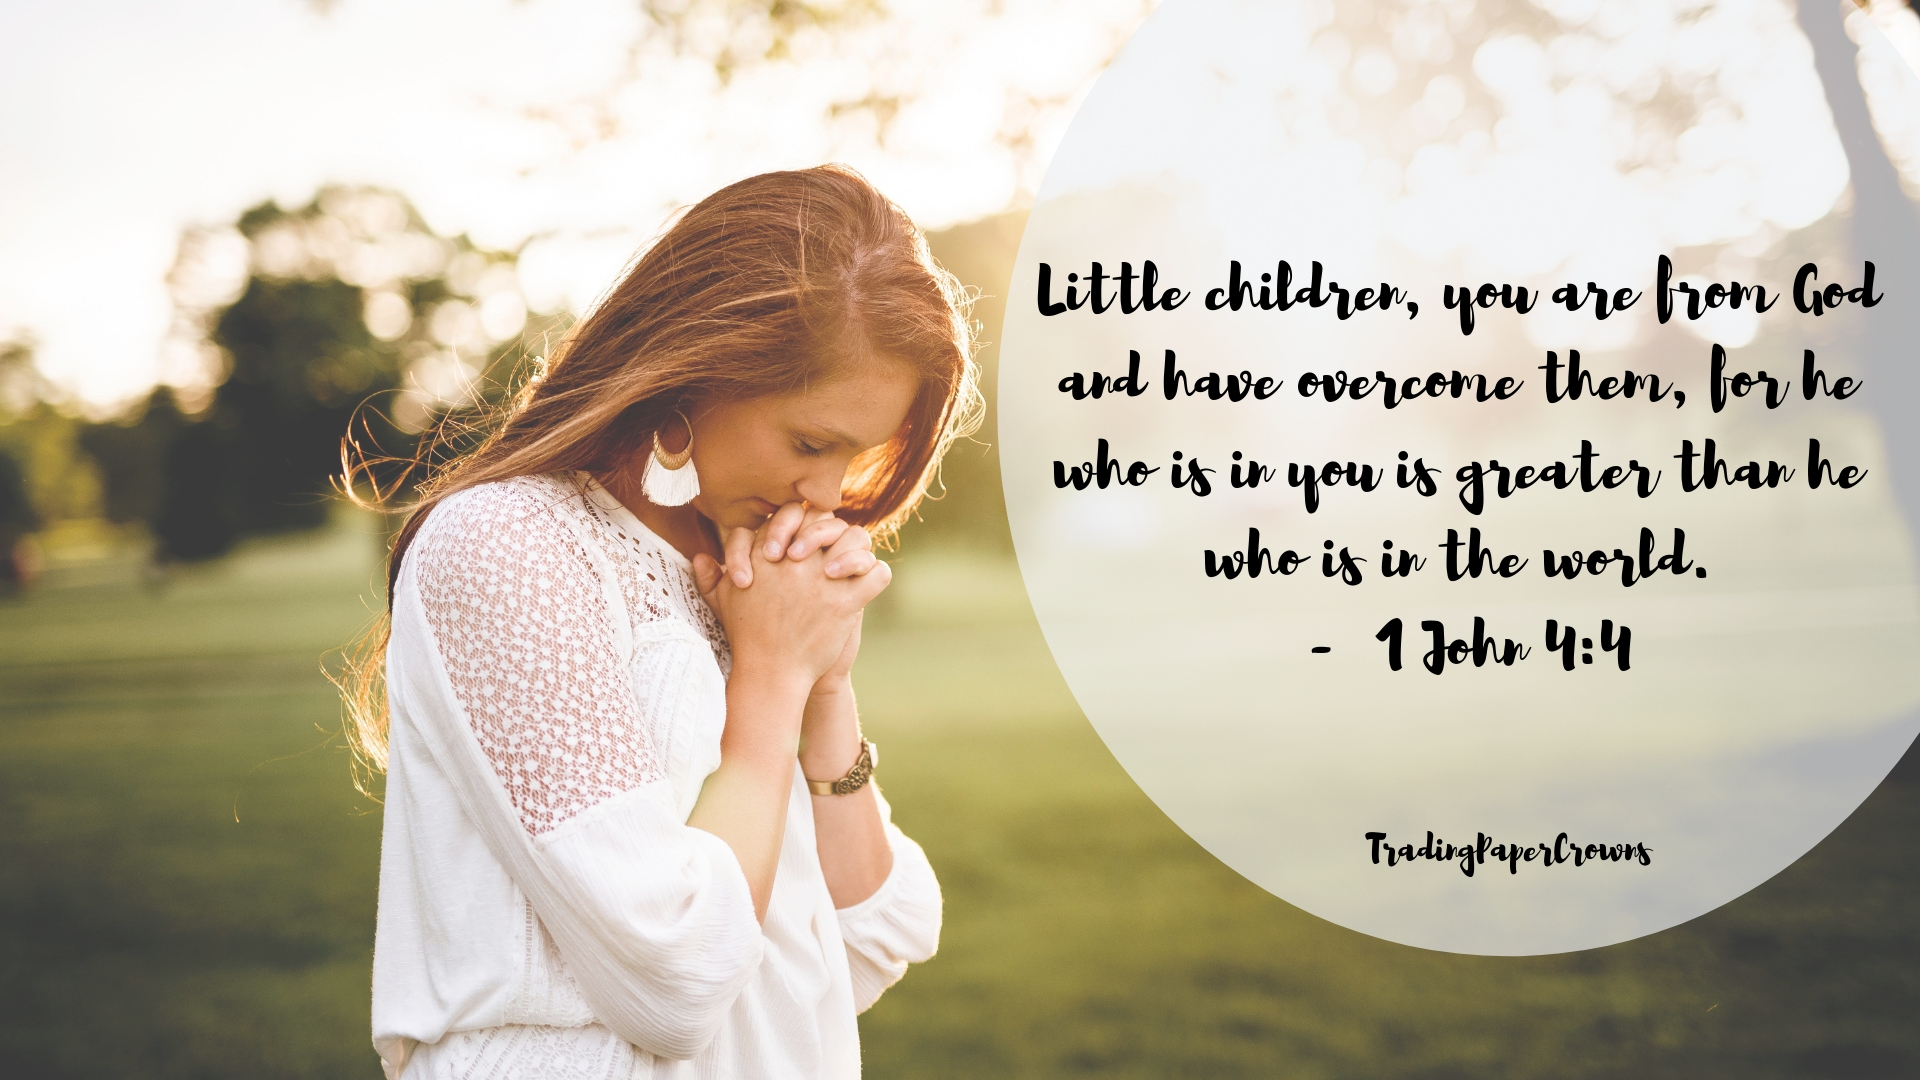 Little children, you are from God and have overcome them, for he who is in you is greater than he who is in the world. - 1 John 4_4.jpg